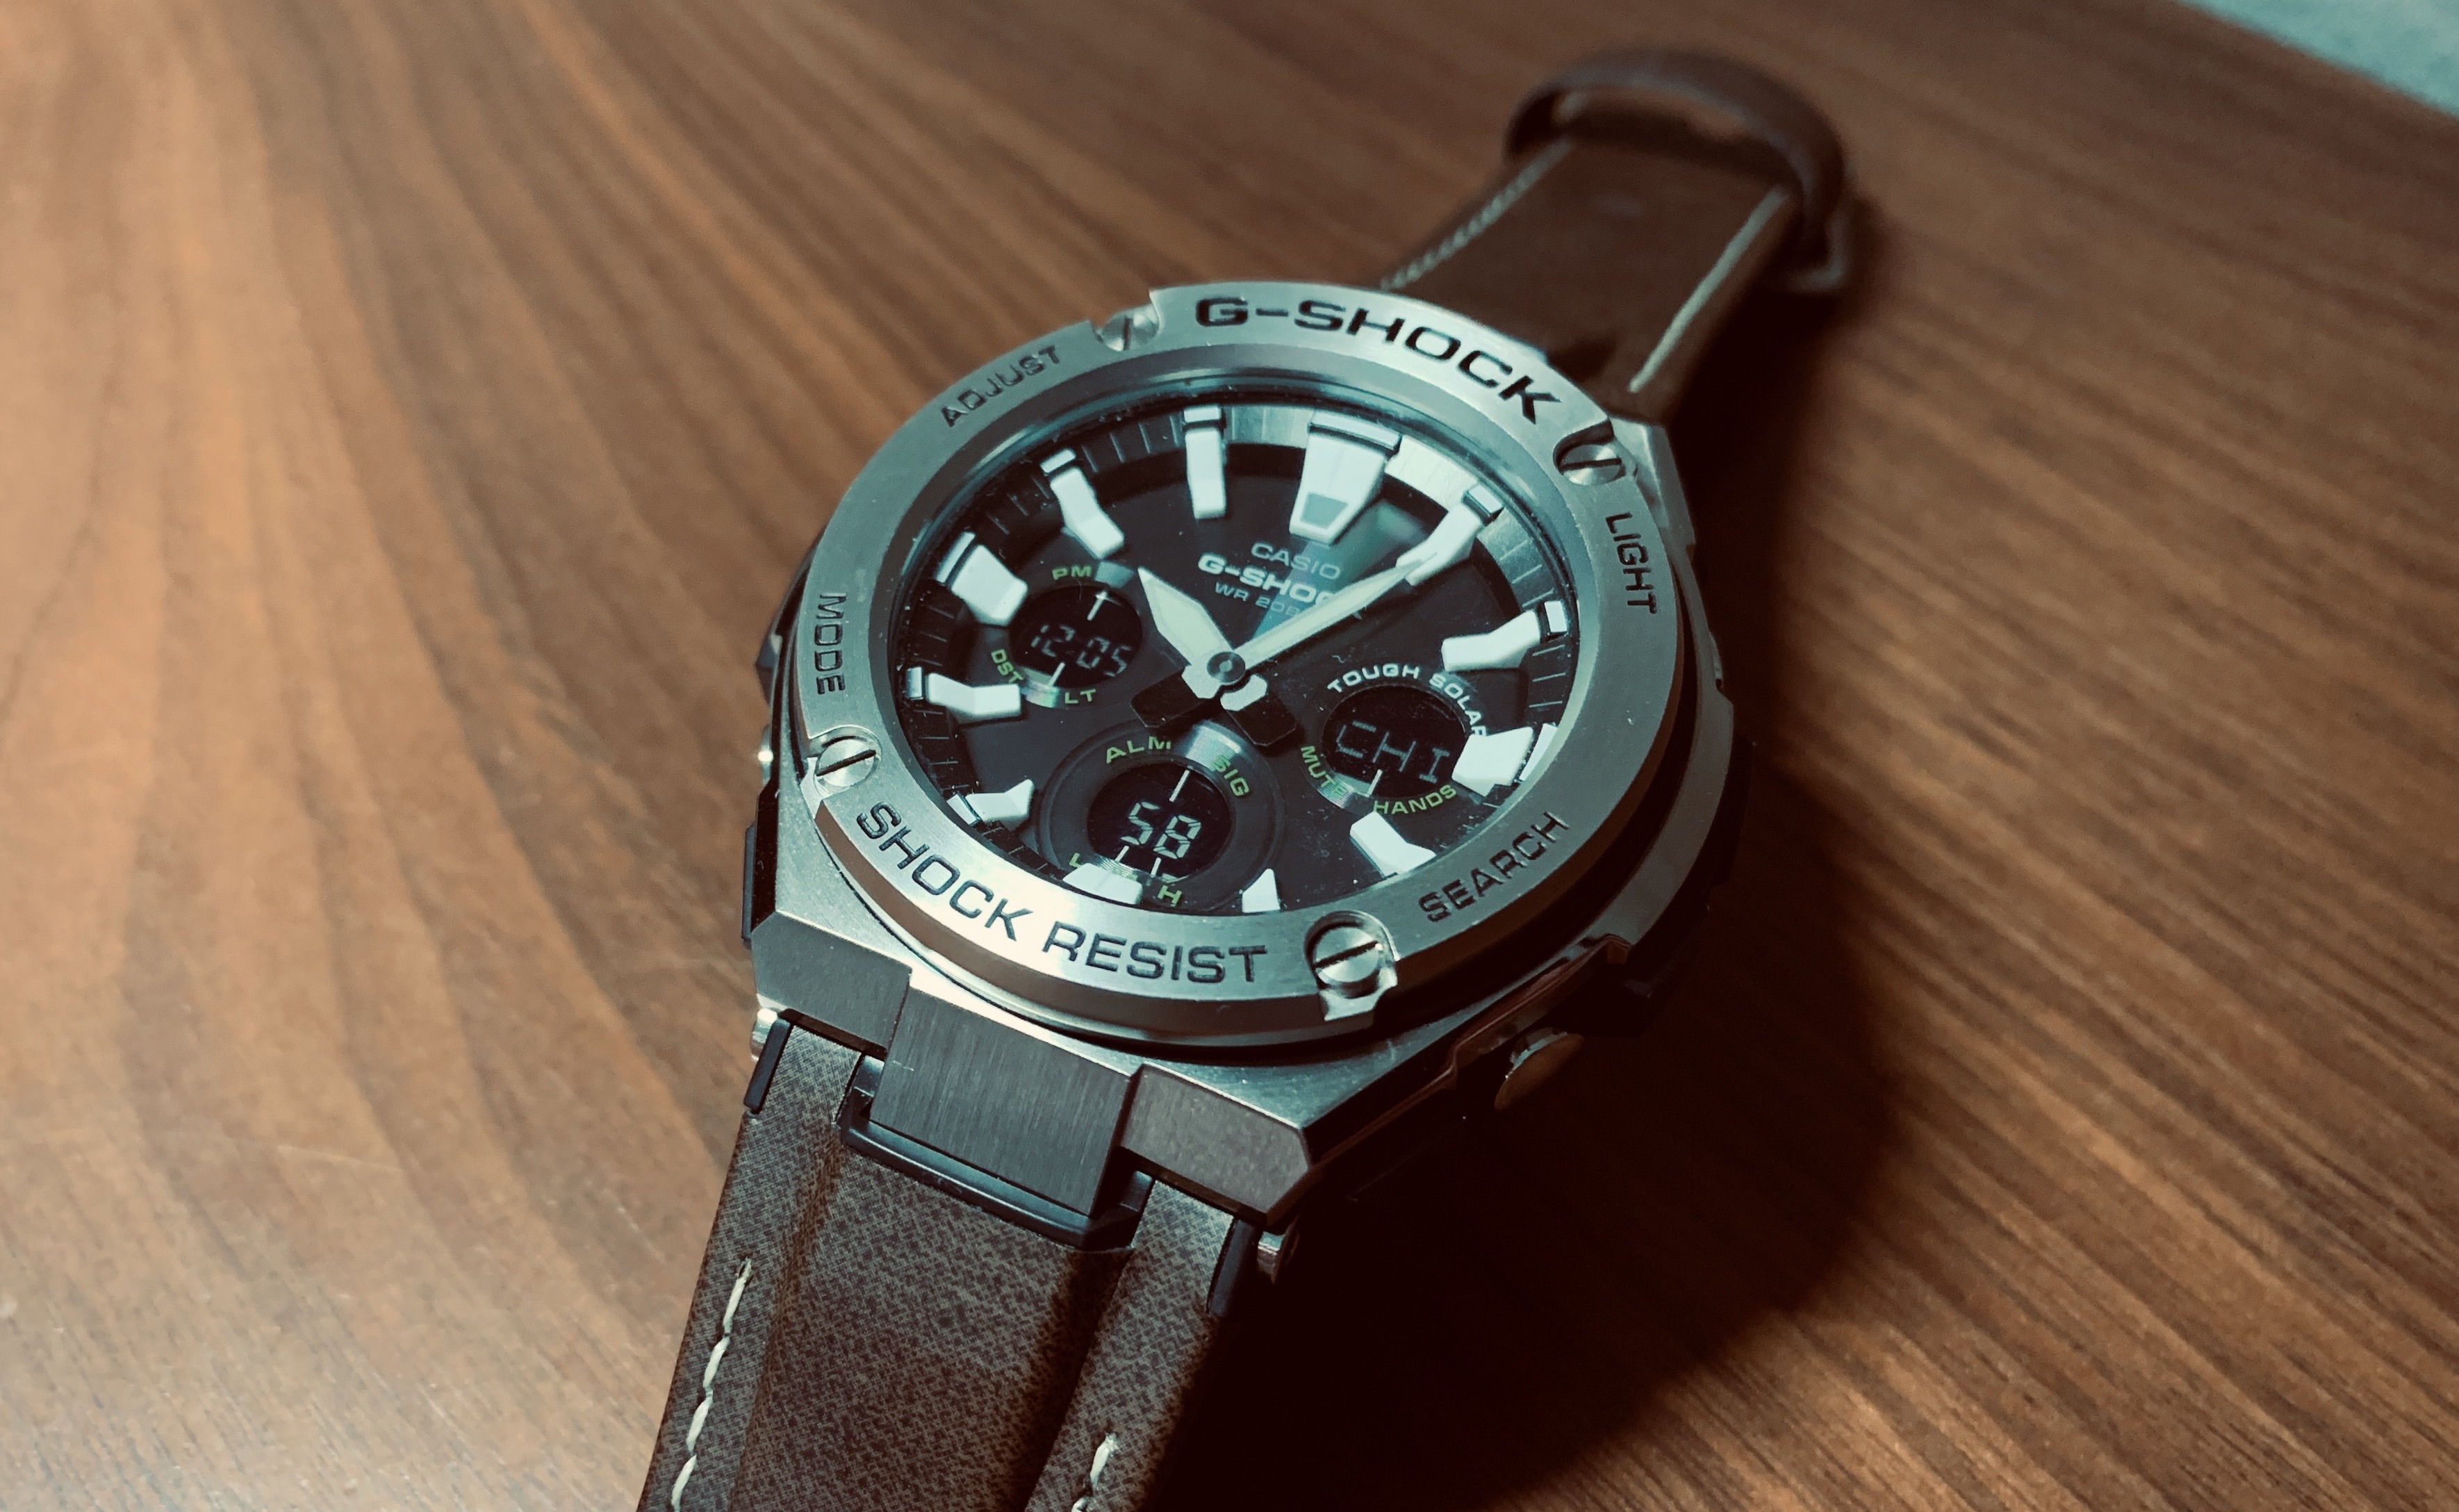 Casio G-SHOCK G-Steel GST-S130C – The Brooks Review